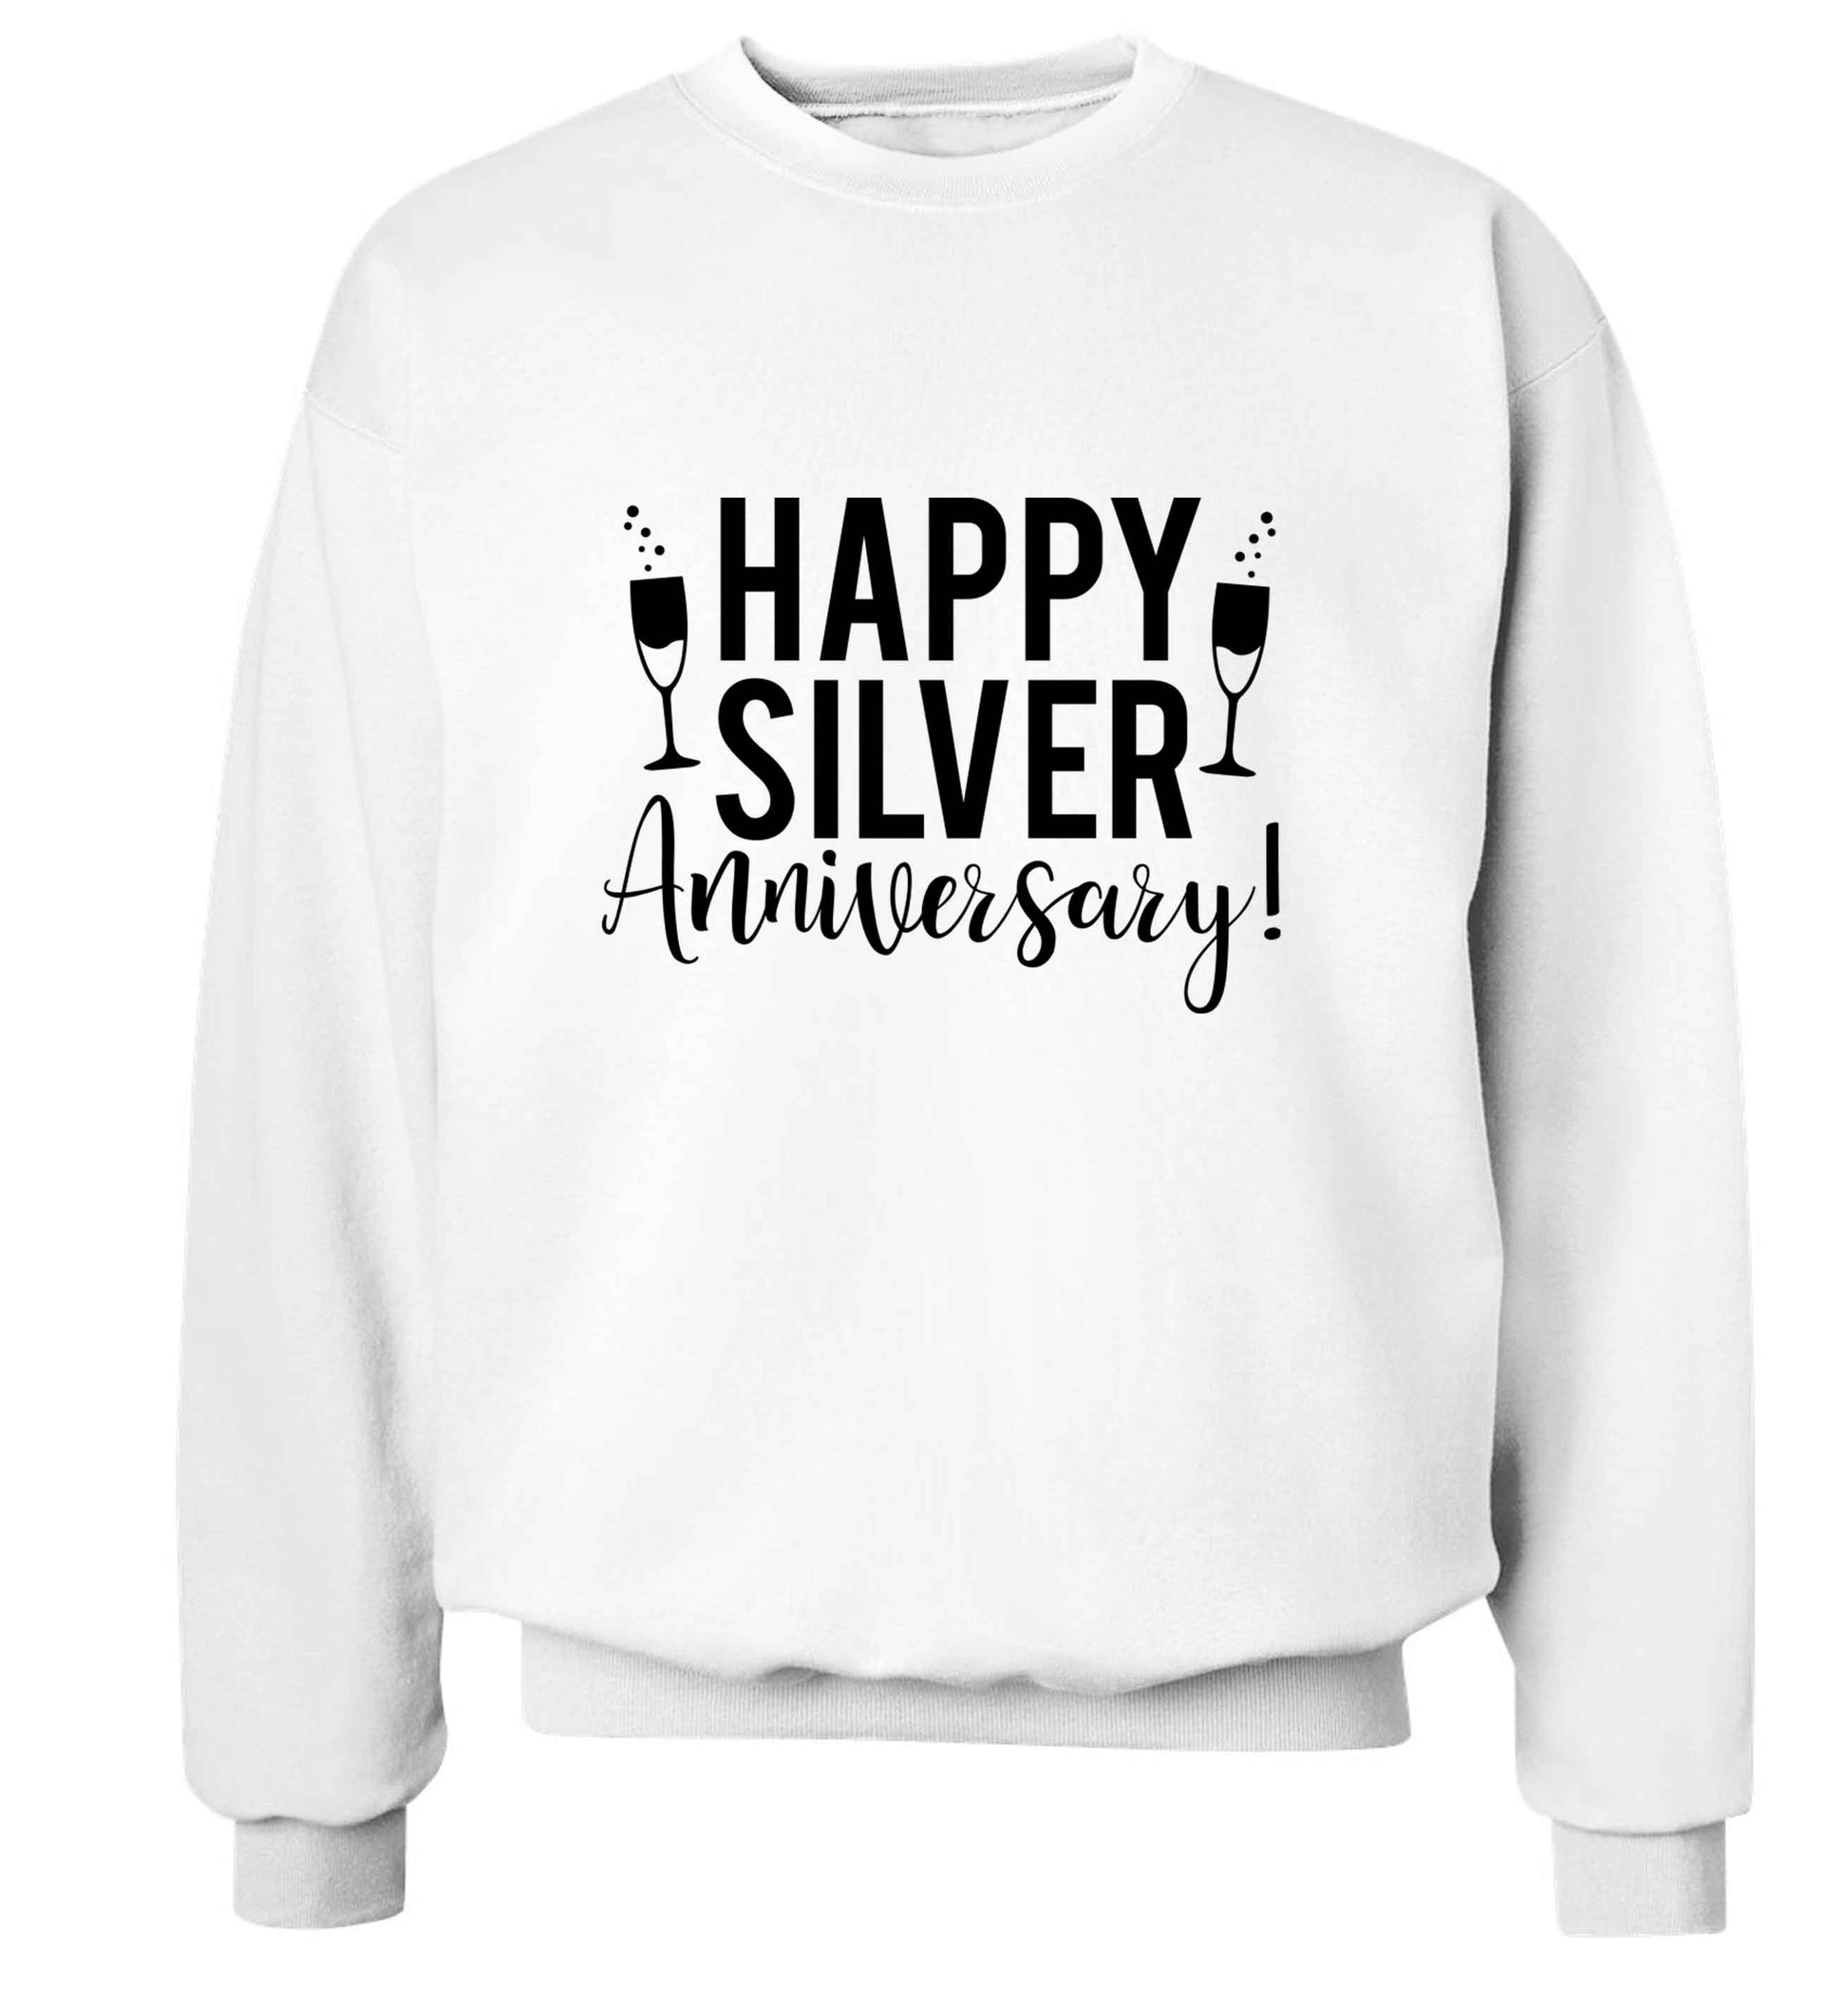 Happy silver anniversary! adult's unisex white sweater 2XL